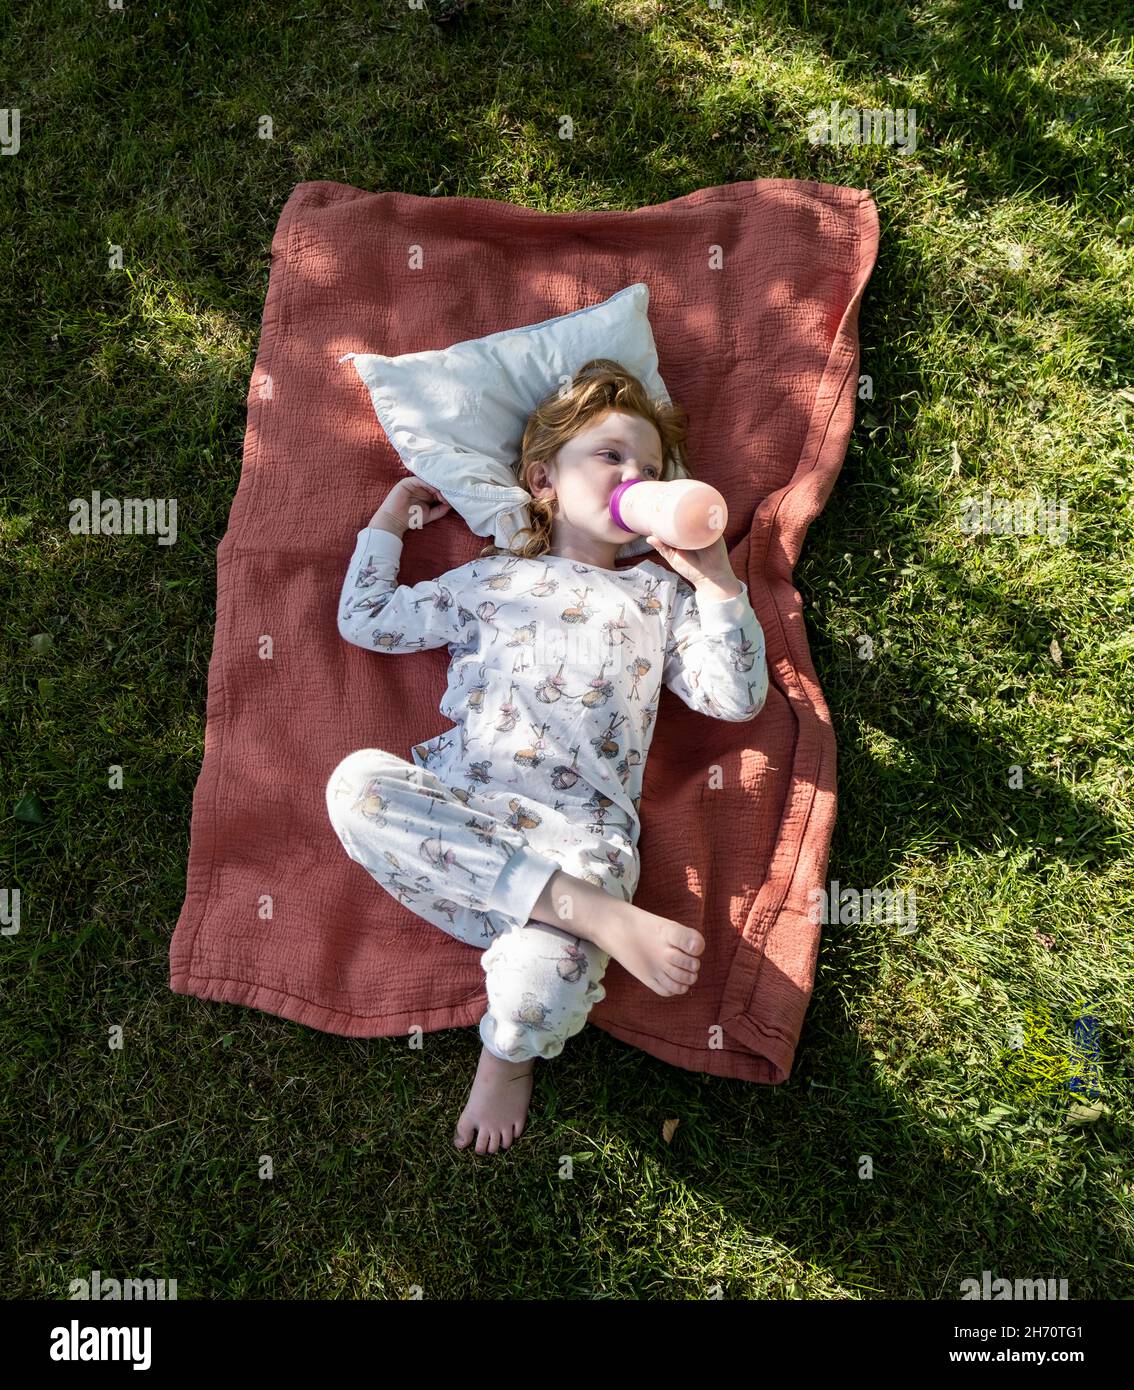 Child lying on grass and drinking from bottle Stock Photo